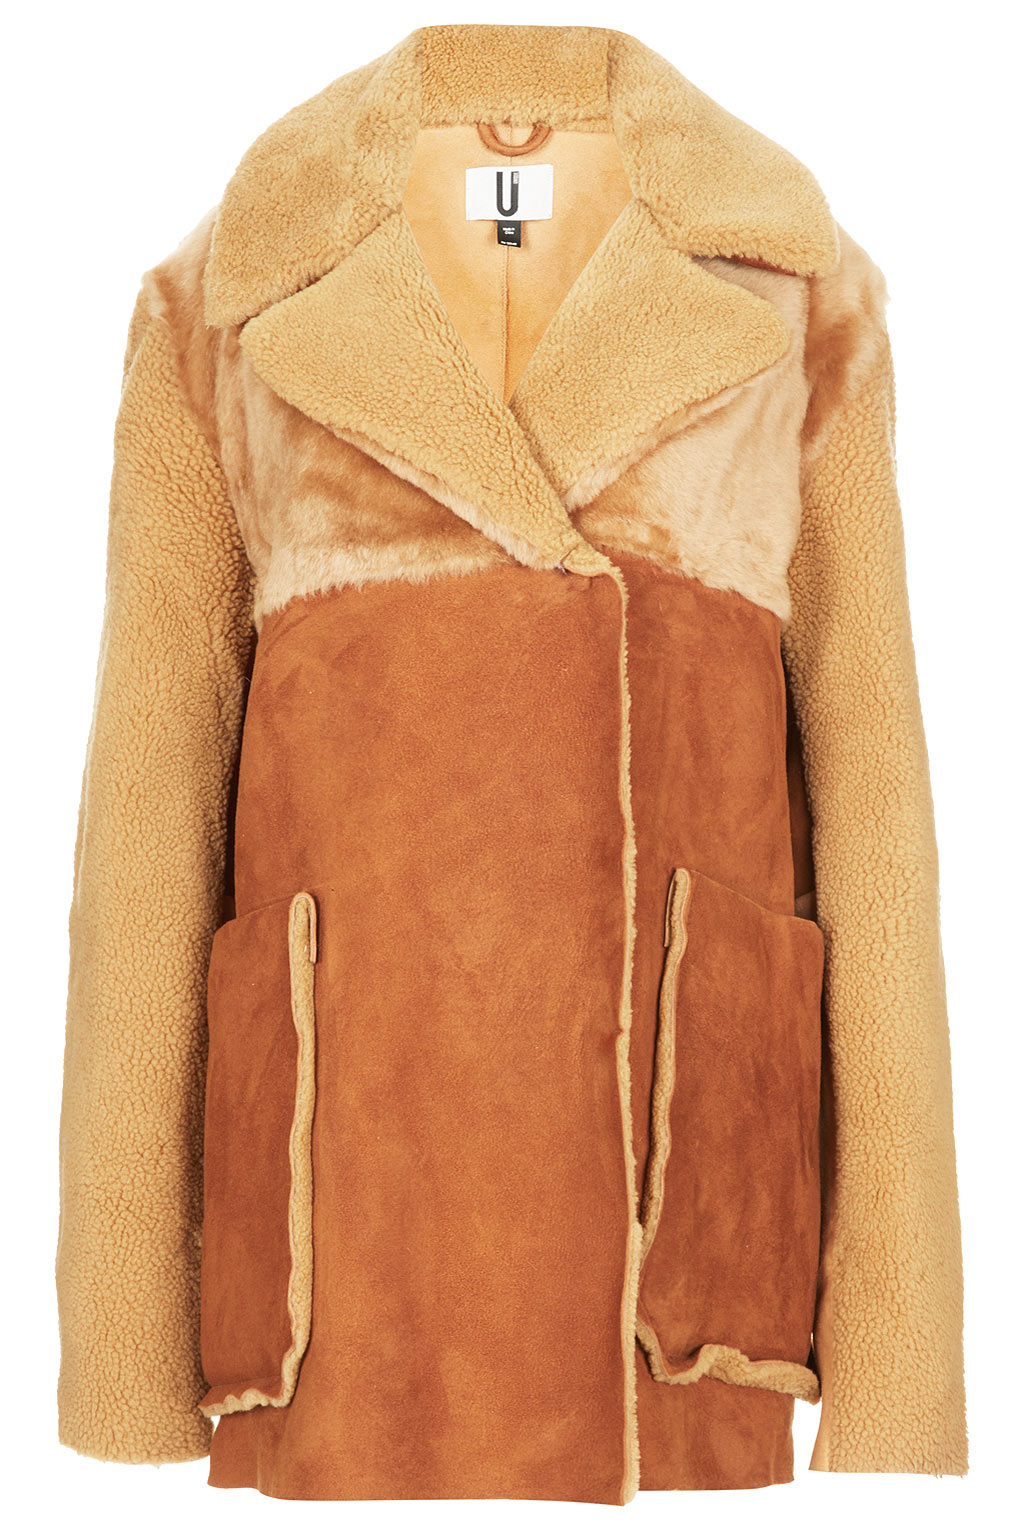 Topshop Shearling Pocket Coat By Unique in Natural | Lyst